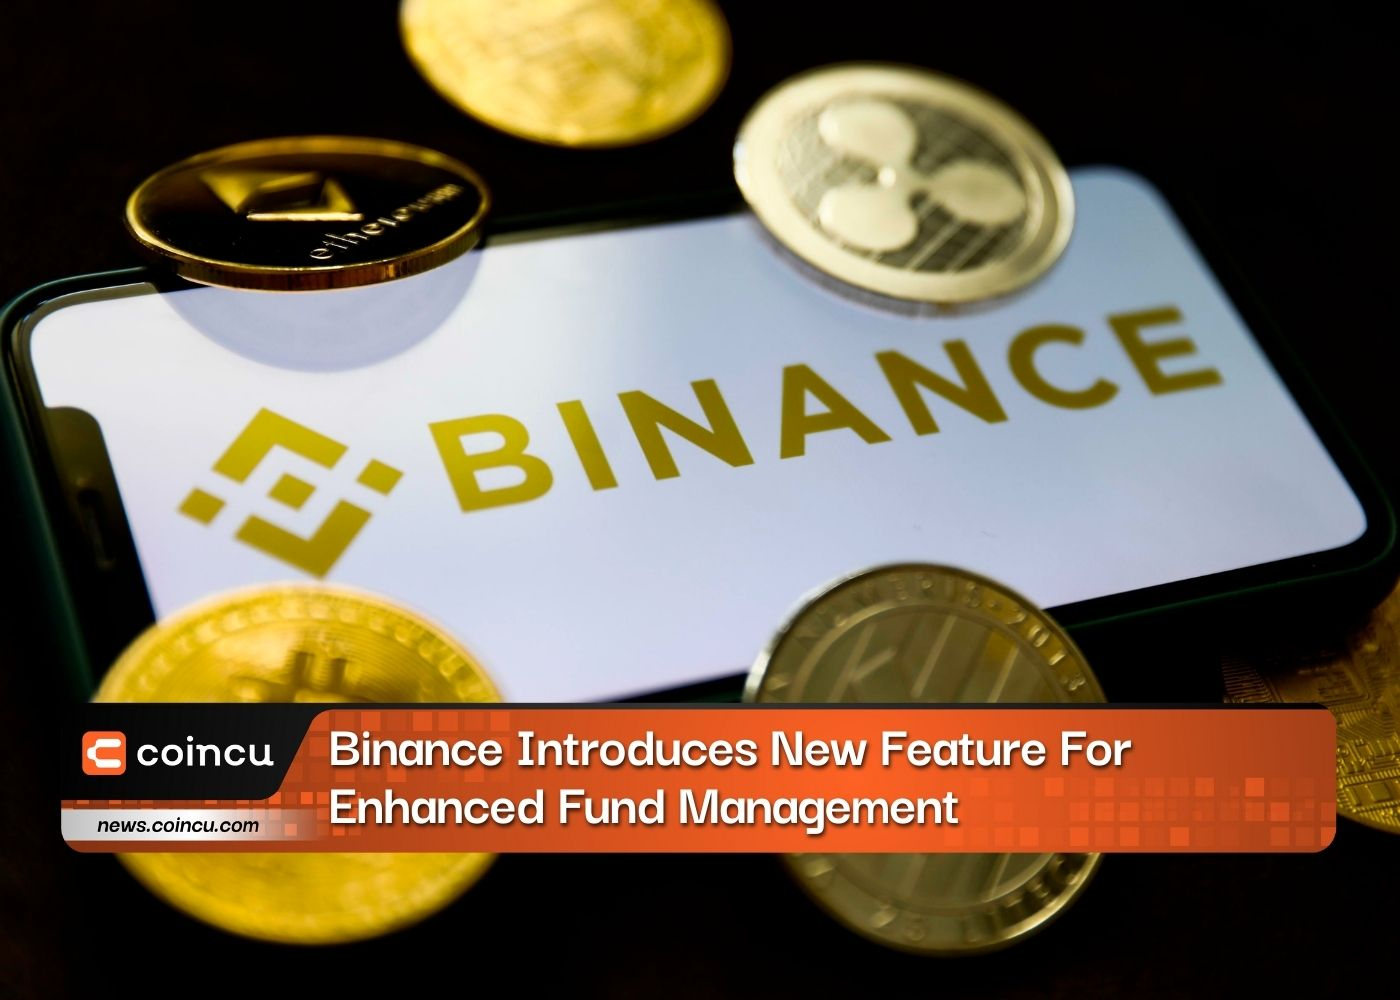 Binance Introduces New Feature For Enhanced Fund Management